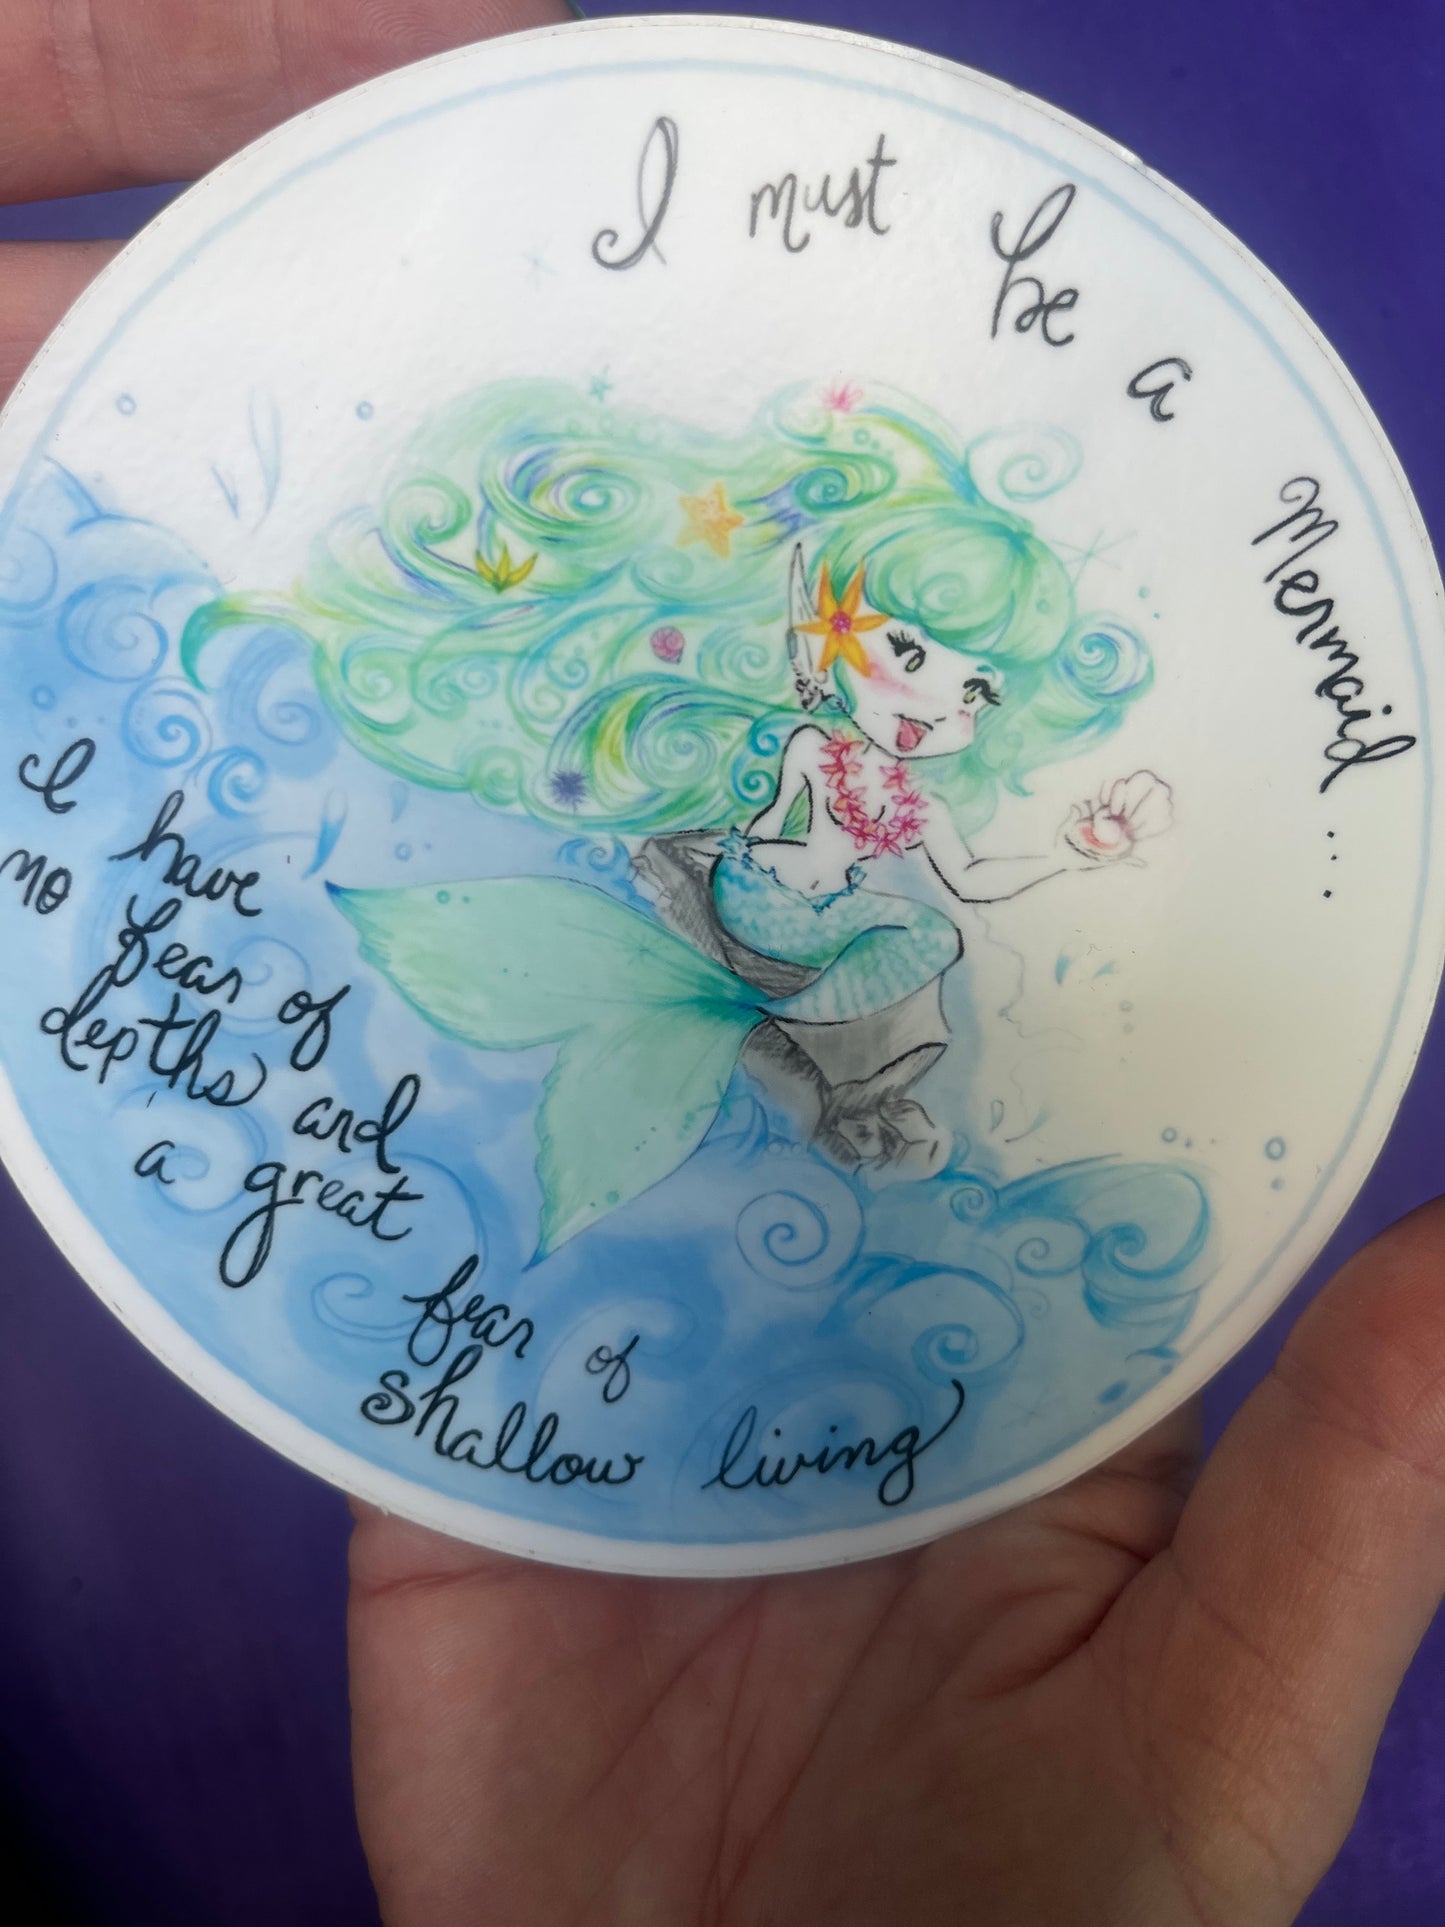 Mermaid Sticker Decal with Anaïs Nin quote